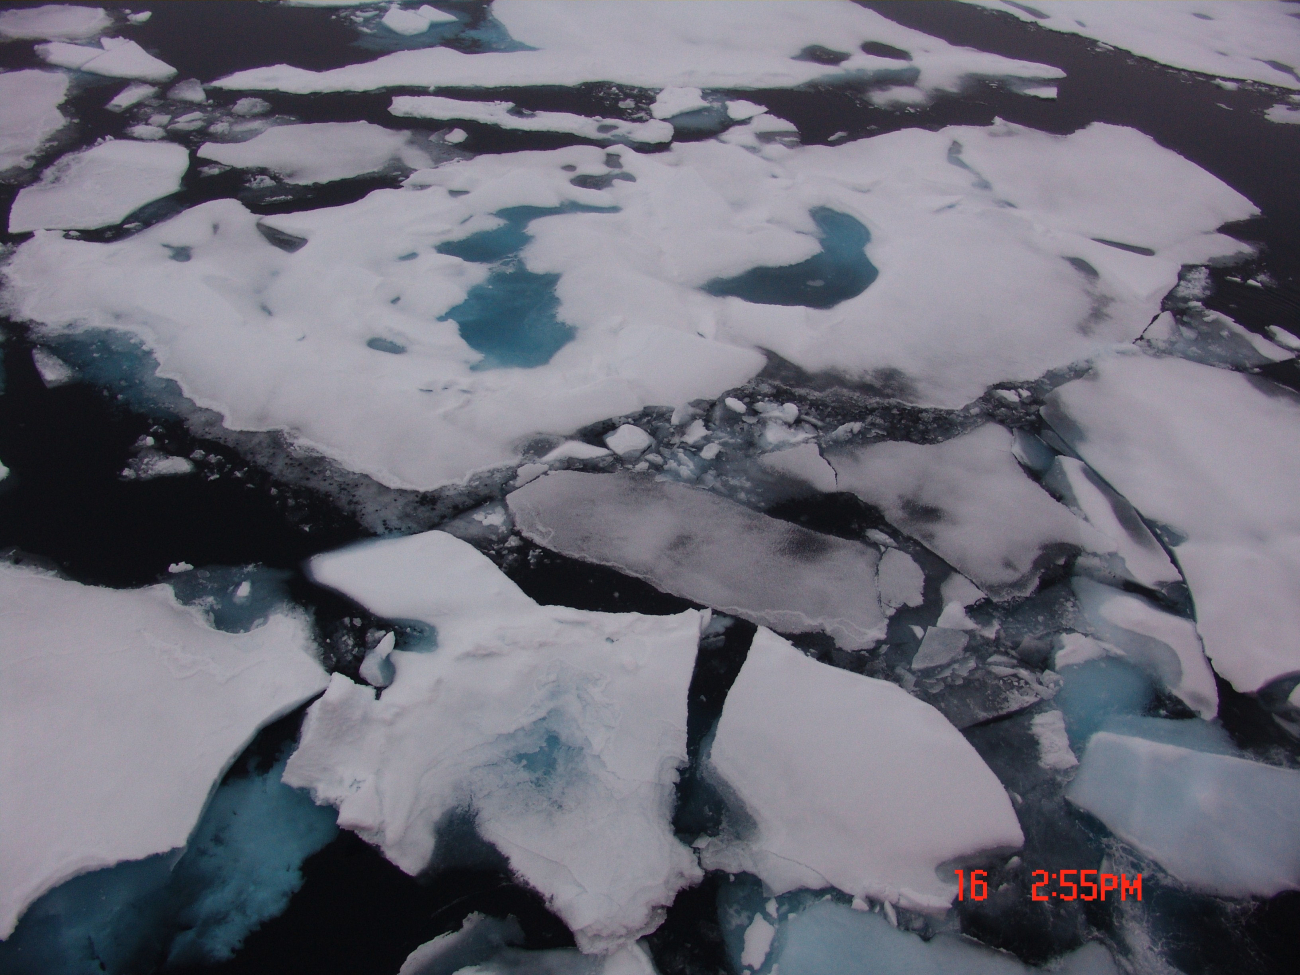 Ice floes with brash ice in the intervening spaces